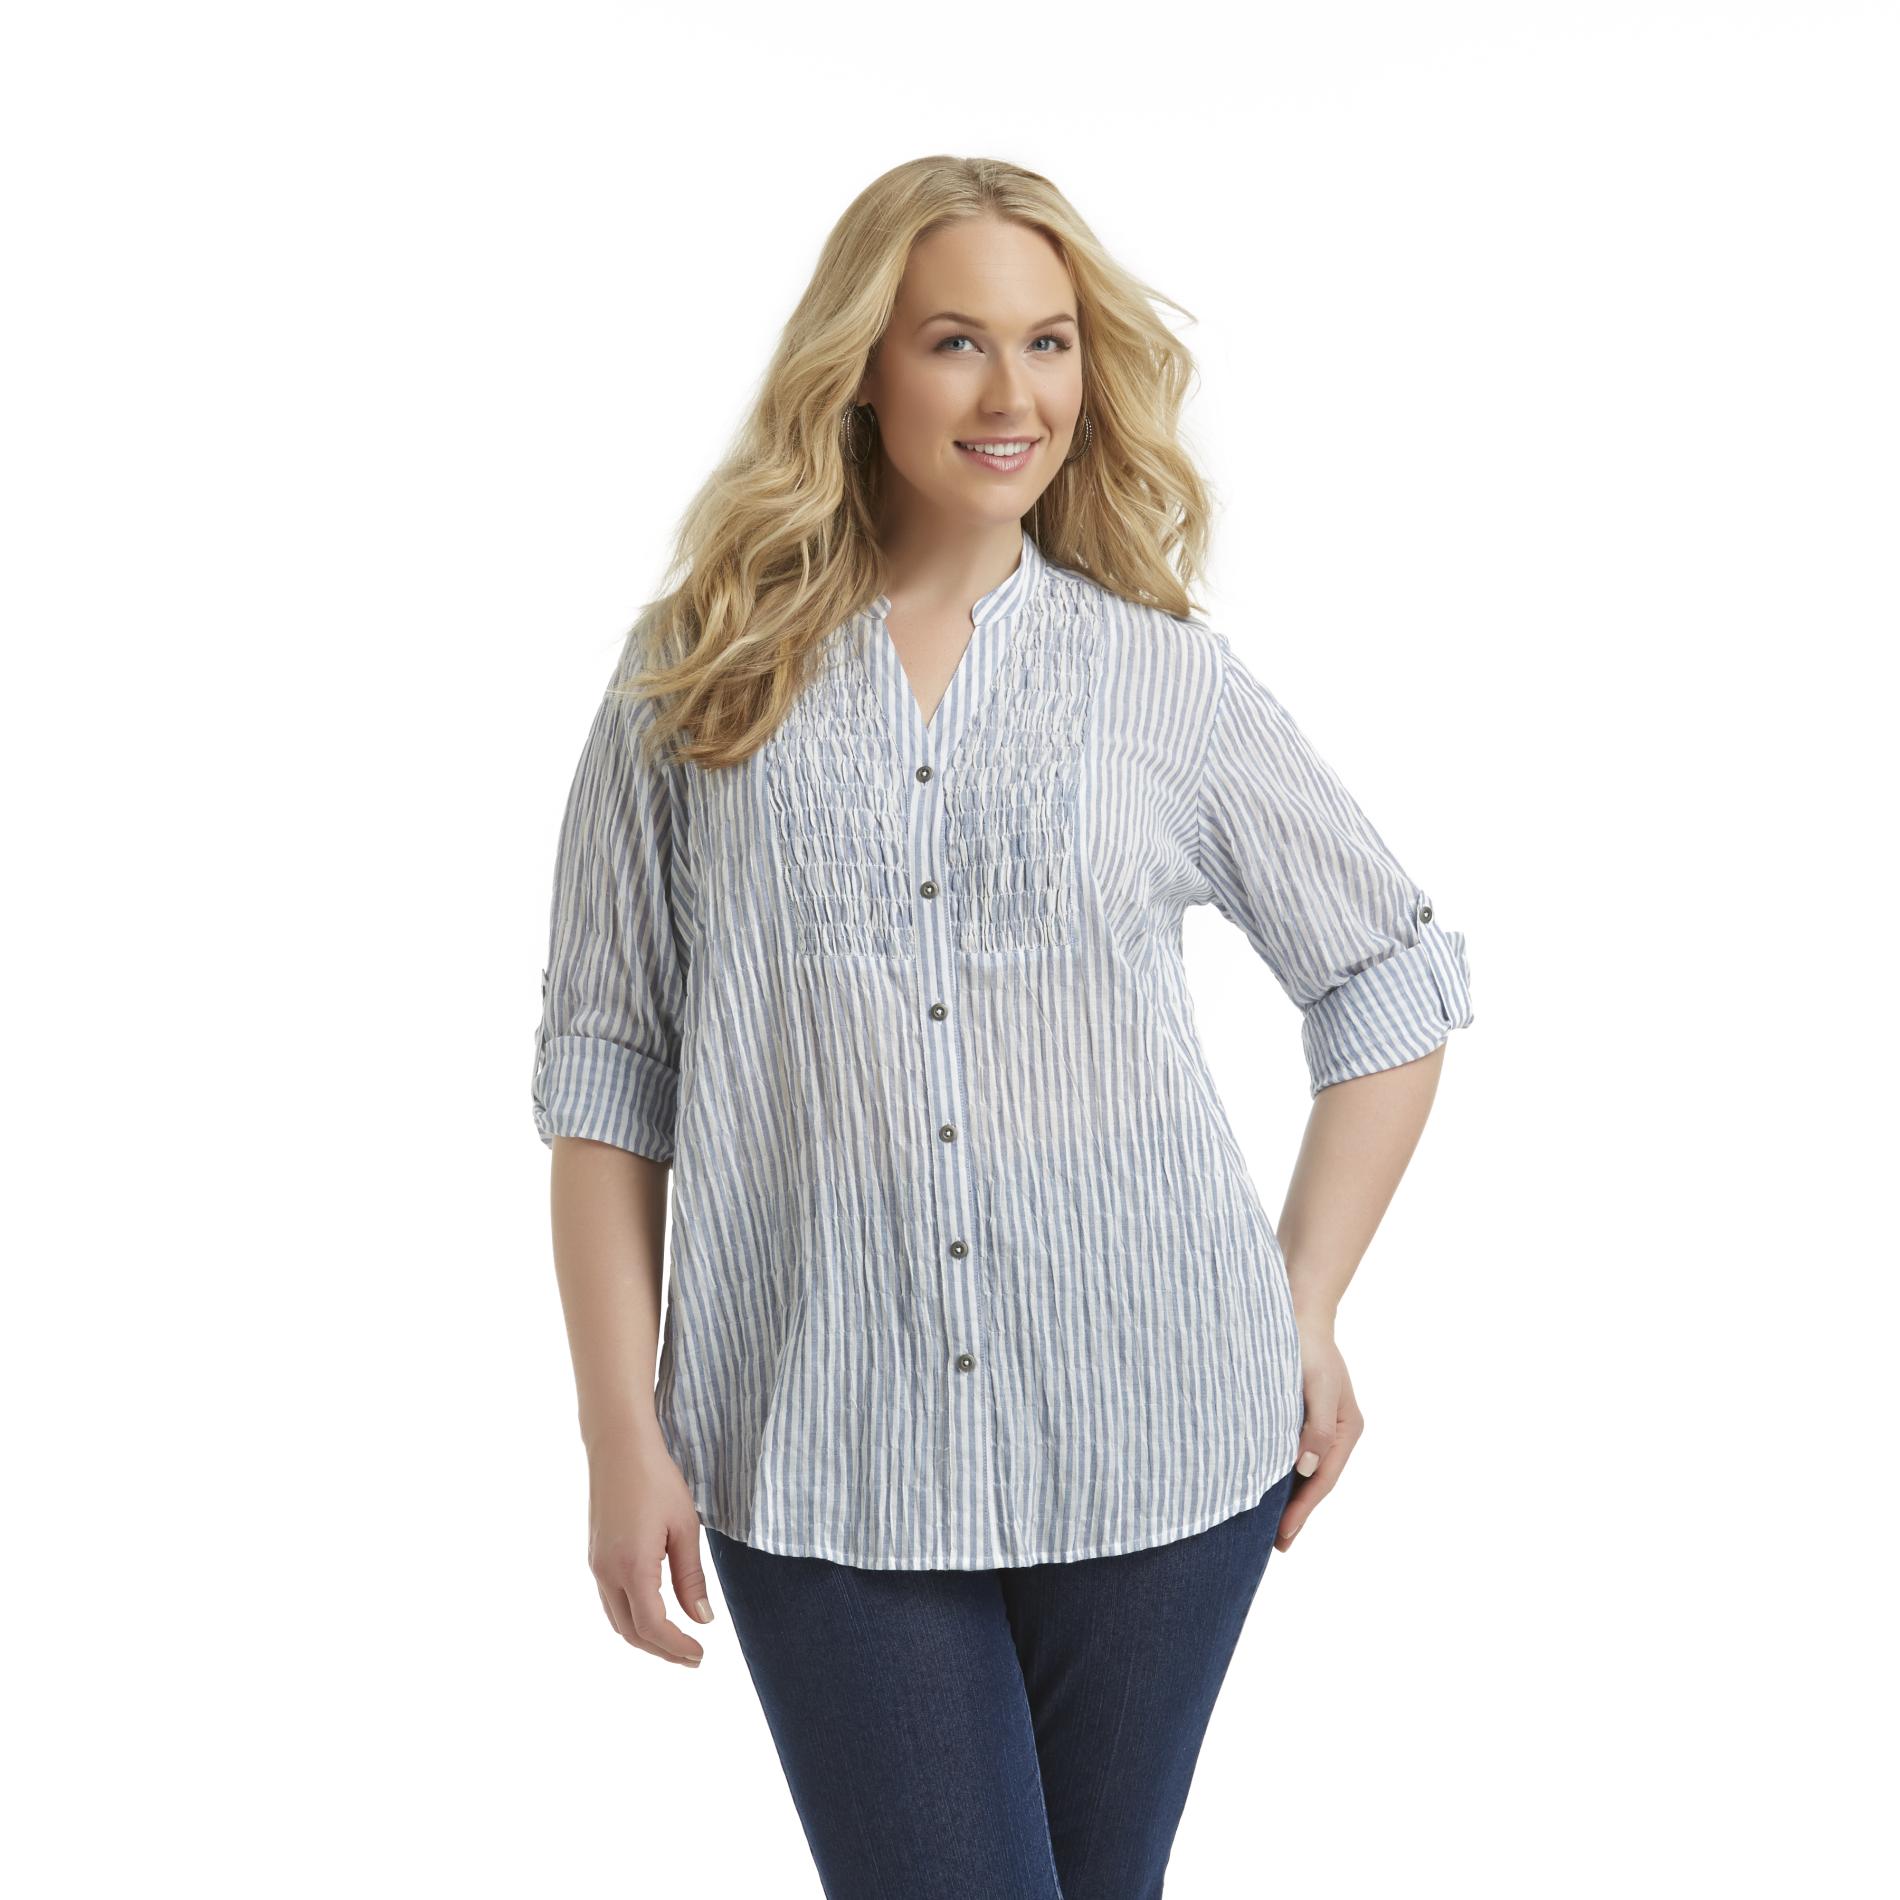 Basic Editions Women's Plus Smocked Stretch Top - Striped